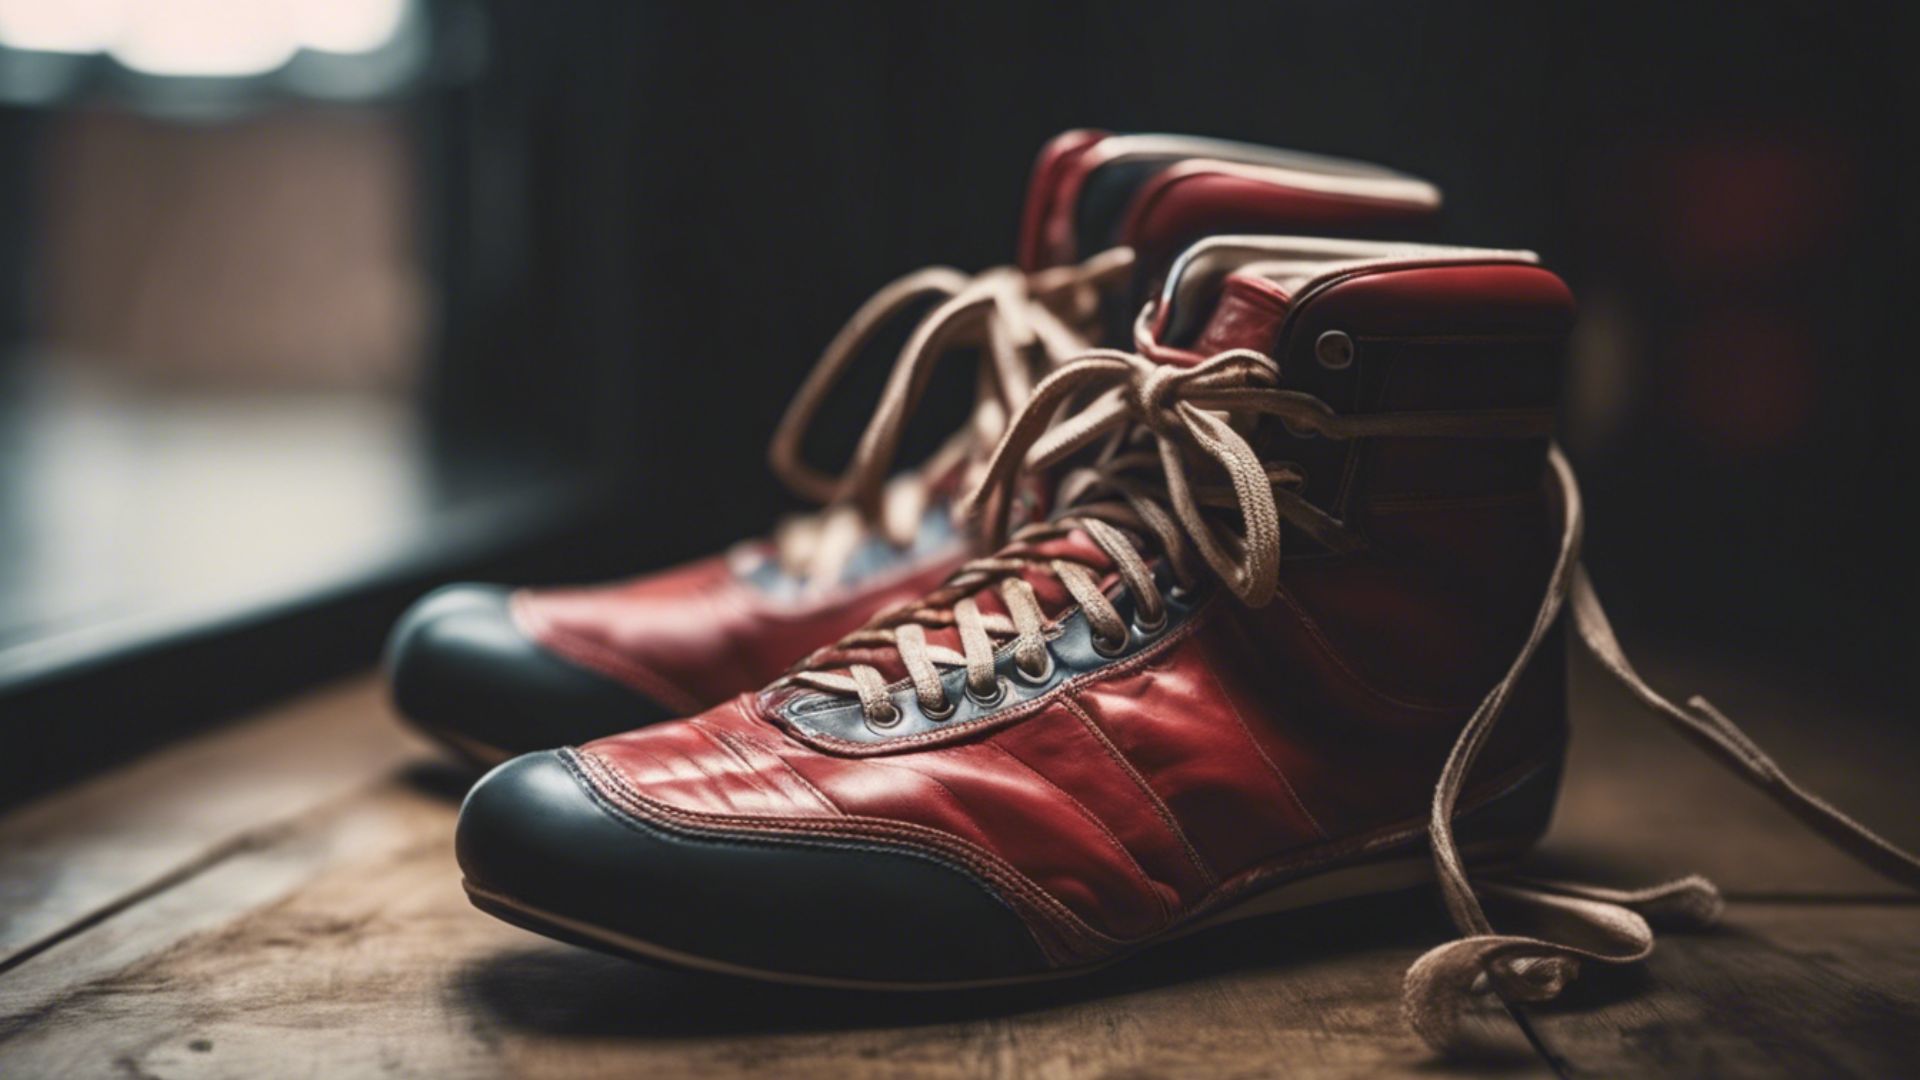 Lace Up Boxing Shoes